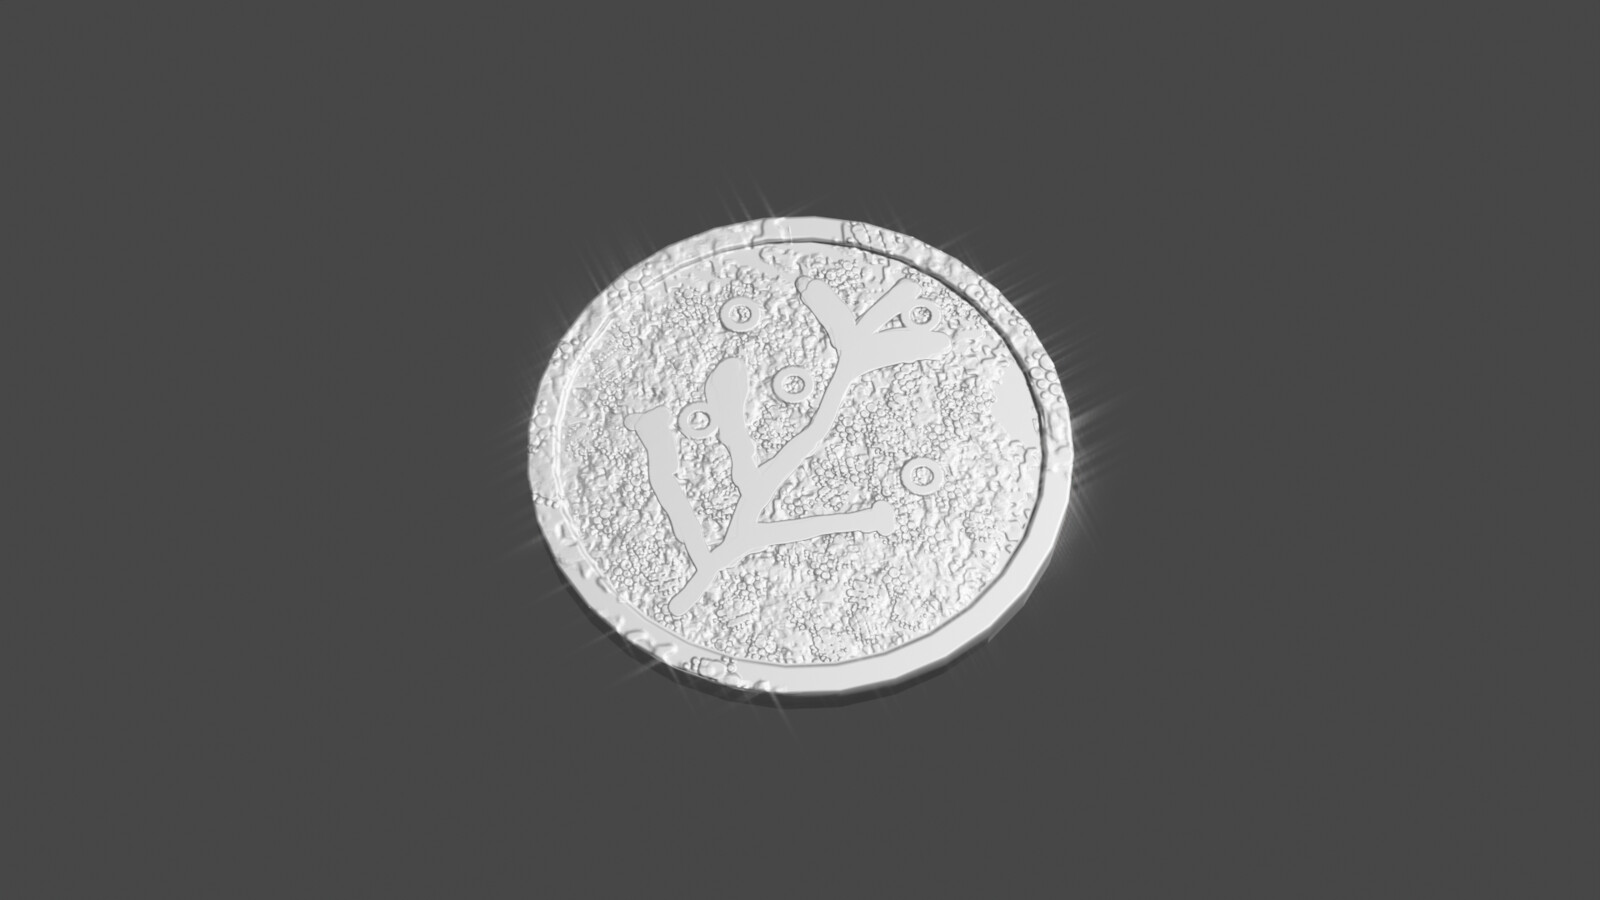 Initial coin, roughly the size of an American half dollar (30.6 mm diameter, 2.15 mm thickness)